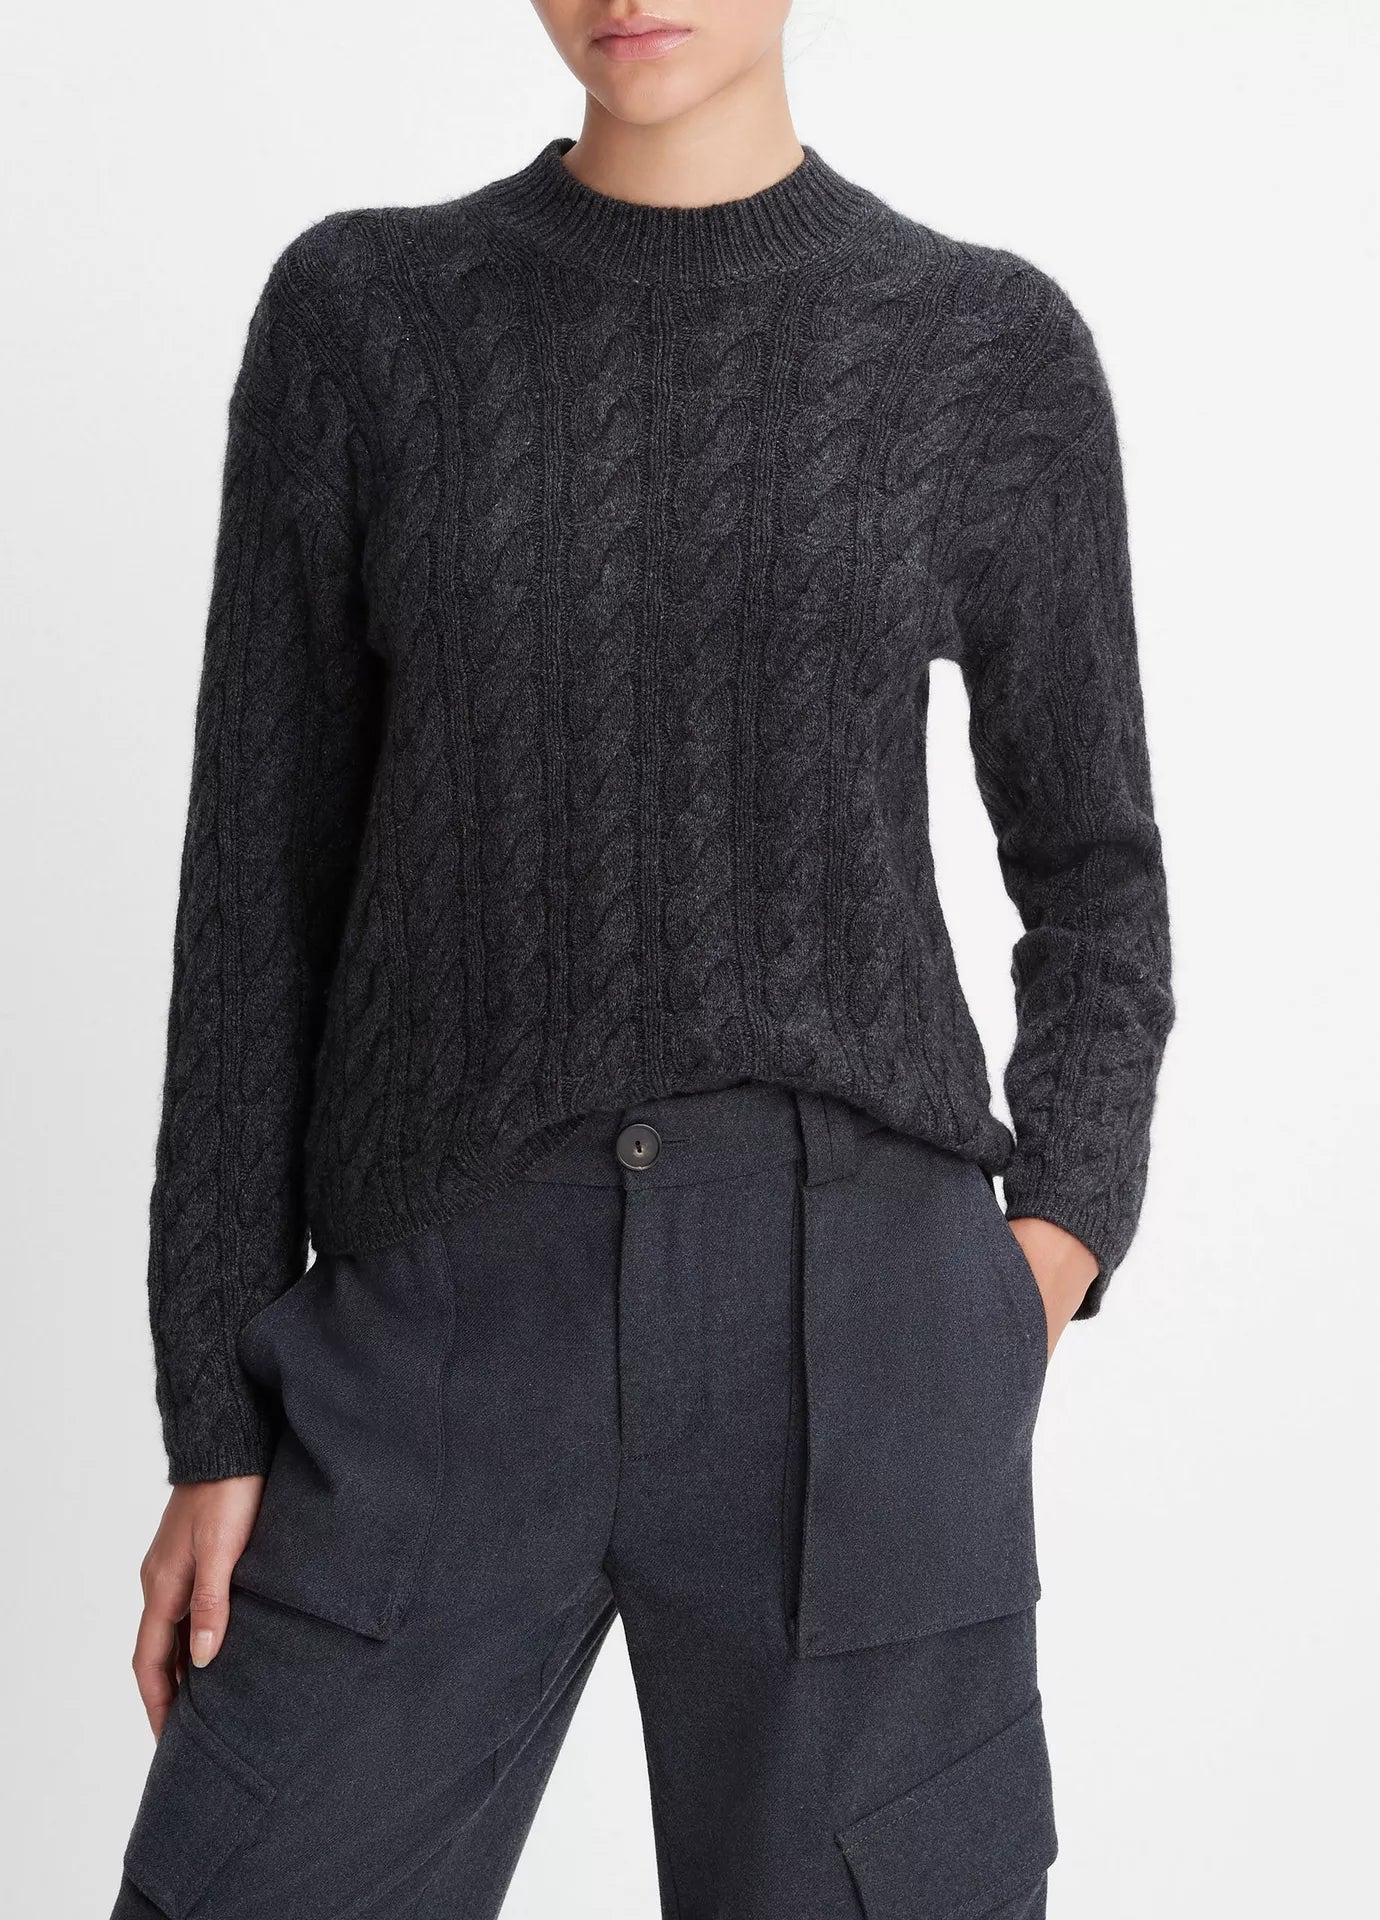 Vince Twisted Cable Crew, sweater, wool cashmere sweater, cable knit sweater, women's clothing